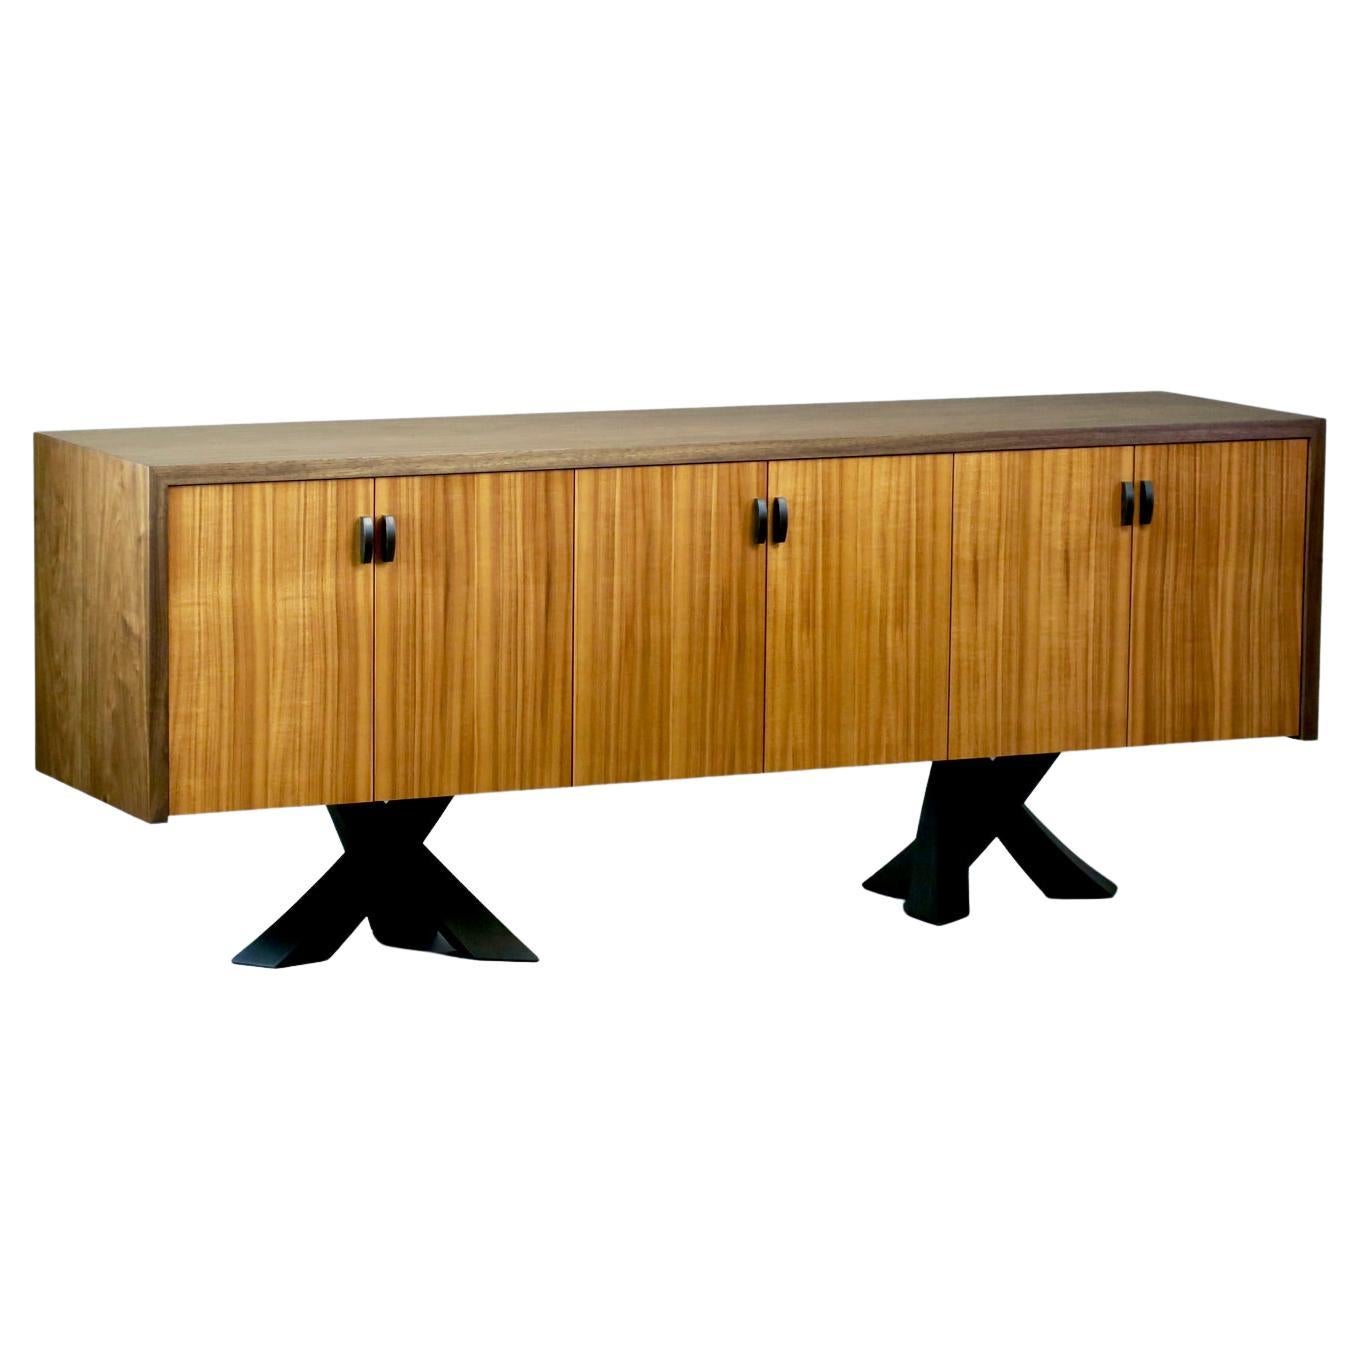 Modern Walnut and Koa Credenza with Sculptural Legs by Thomas Throop - In Stock